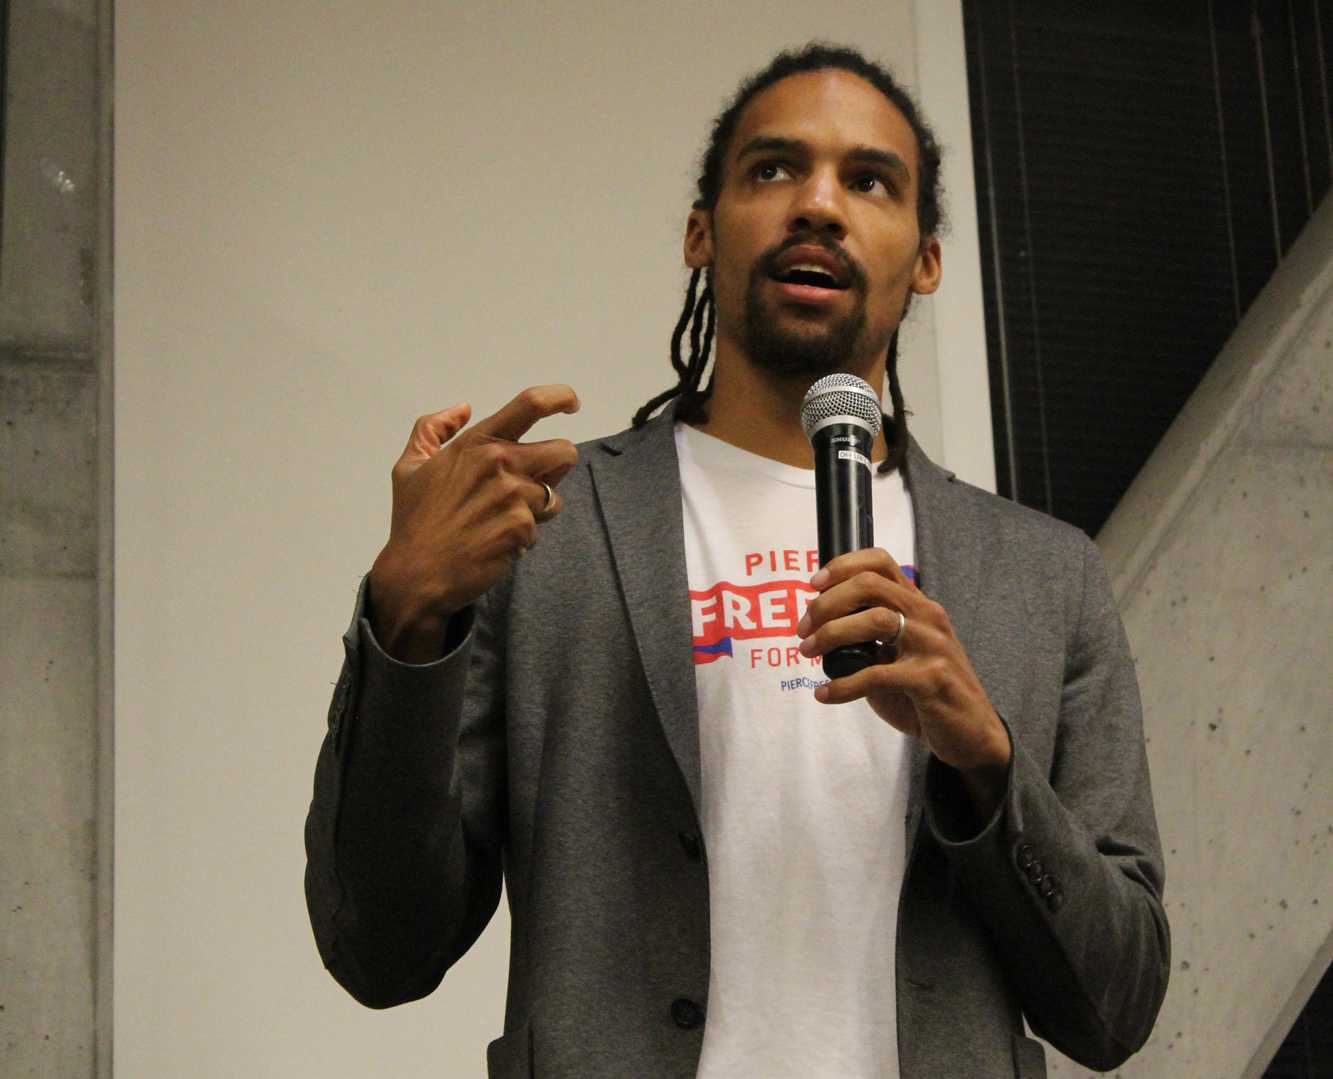 Pierce Freelon answers a students question about his favorite political and social influencers. Freelon is an artivist - an artist and activist - from Durham, North Carolina and spoke to students about deconstructing racism on September 14th.